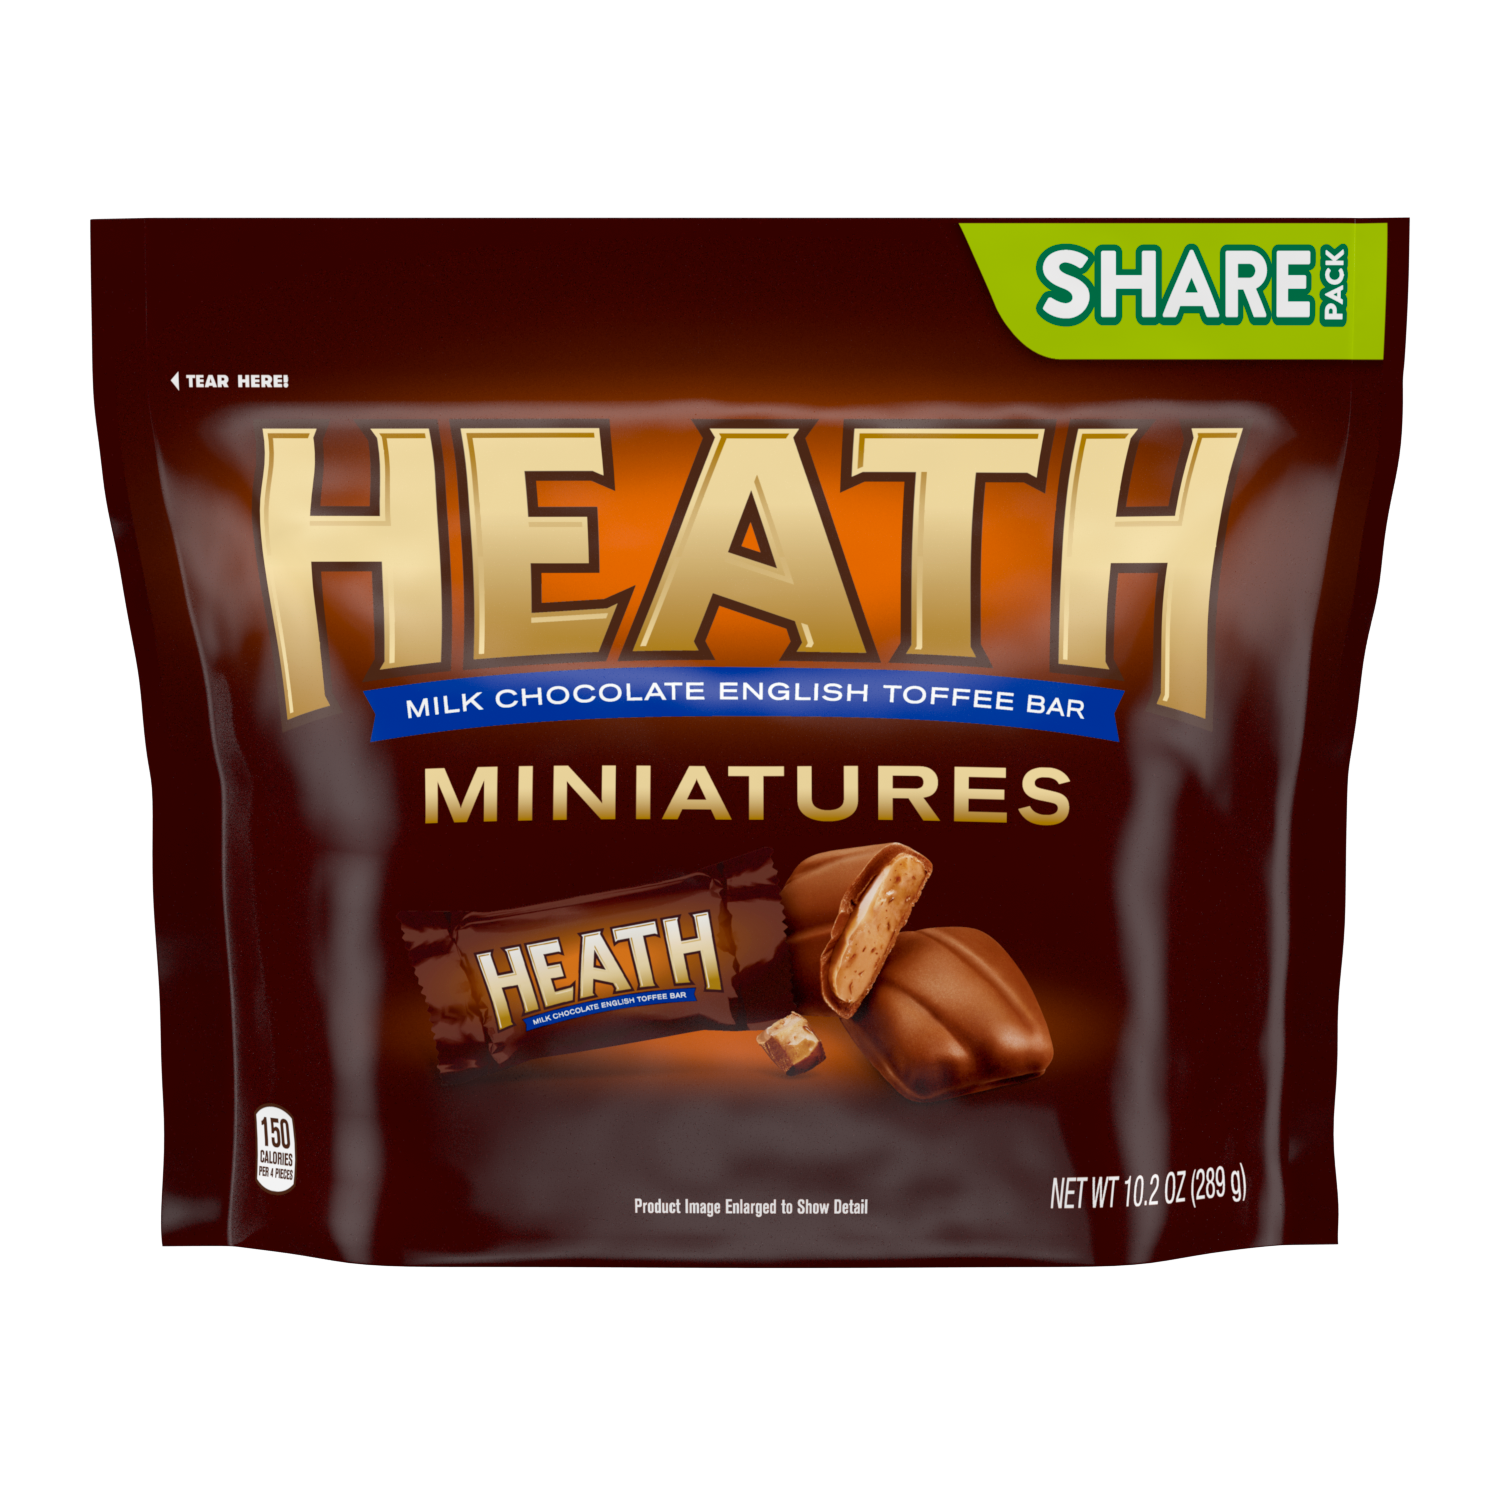 HEATH Miniatures Milk Chocolate English Toffee Candy Bars, 10.2 oz bag - Front of Package